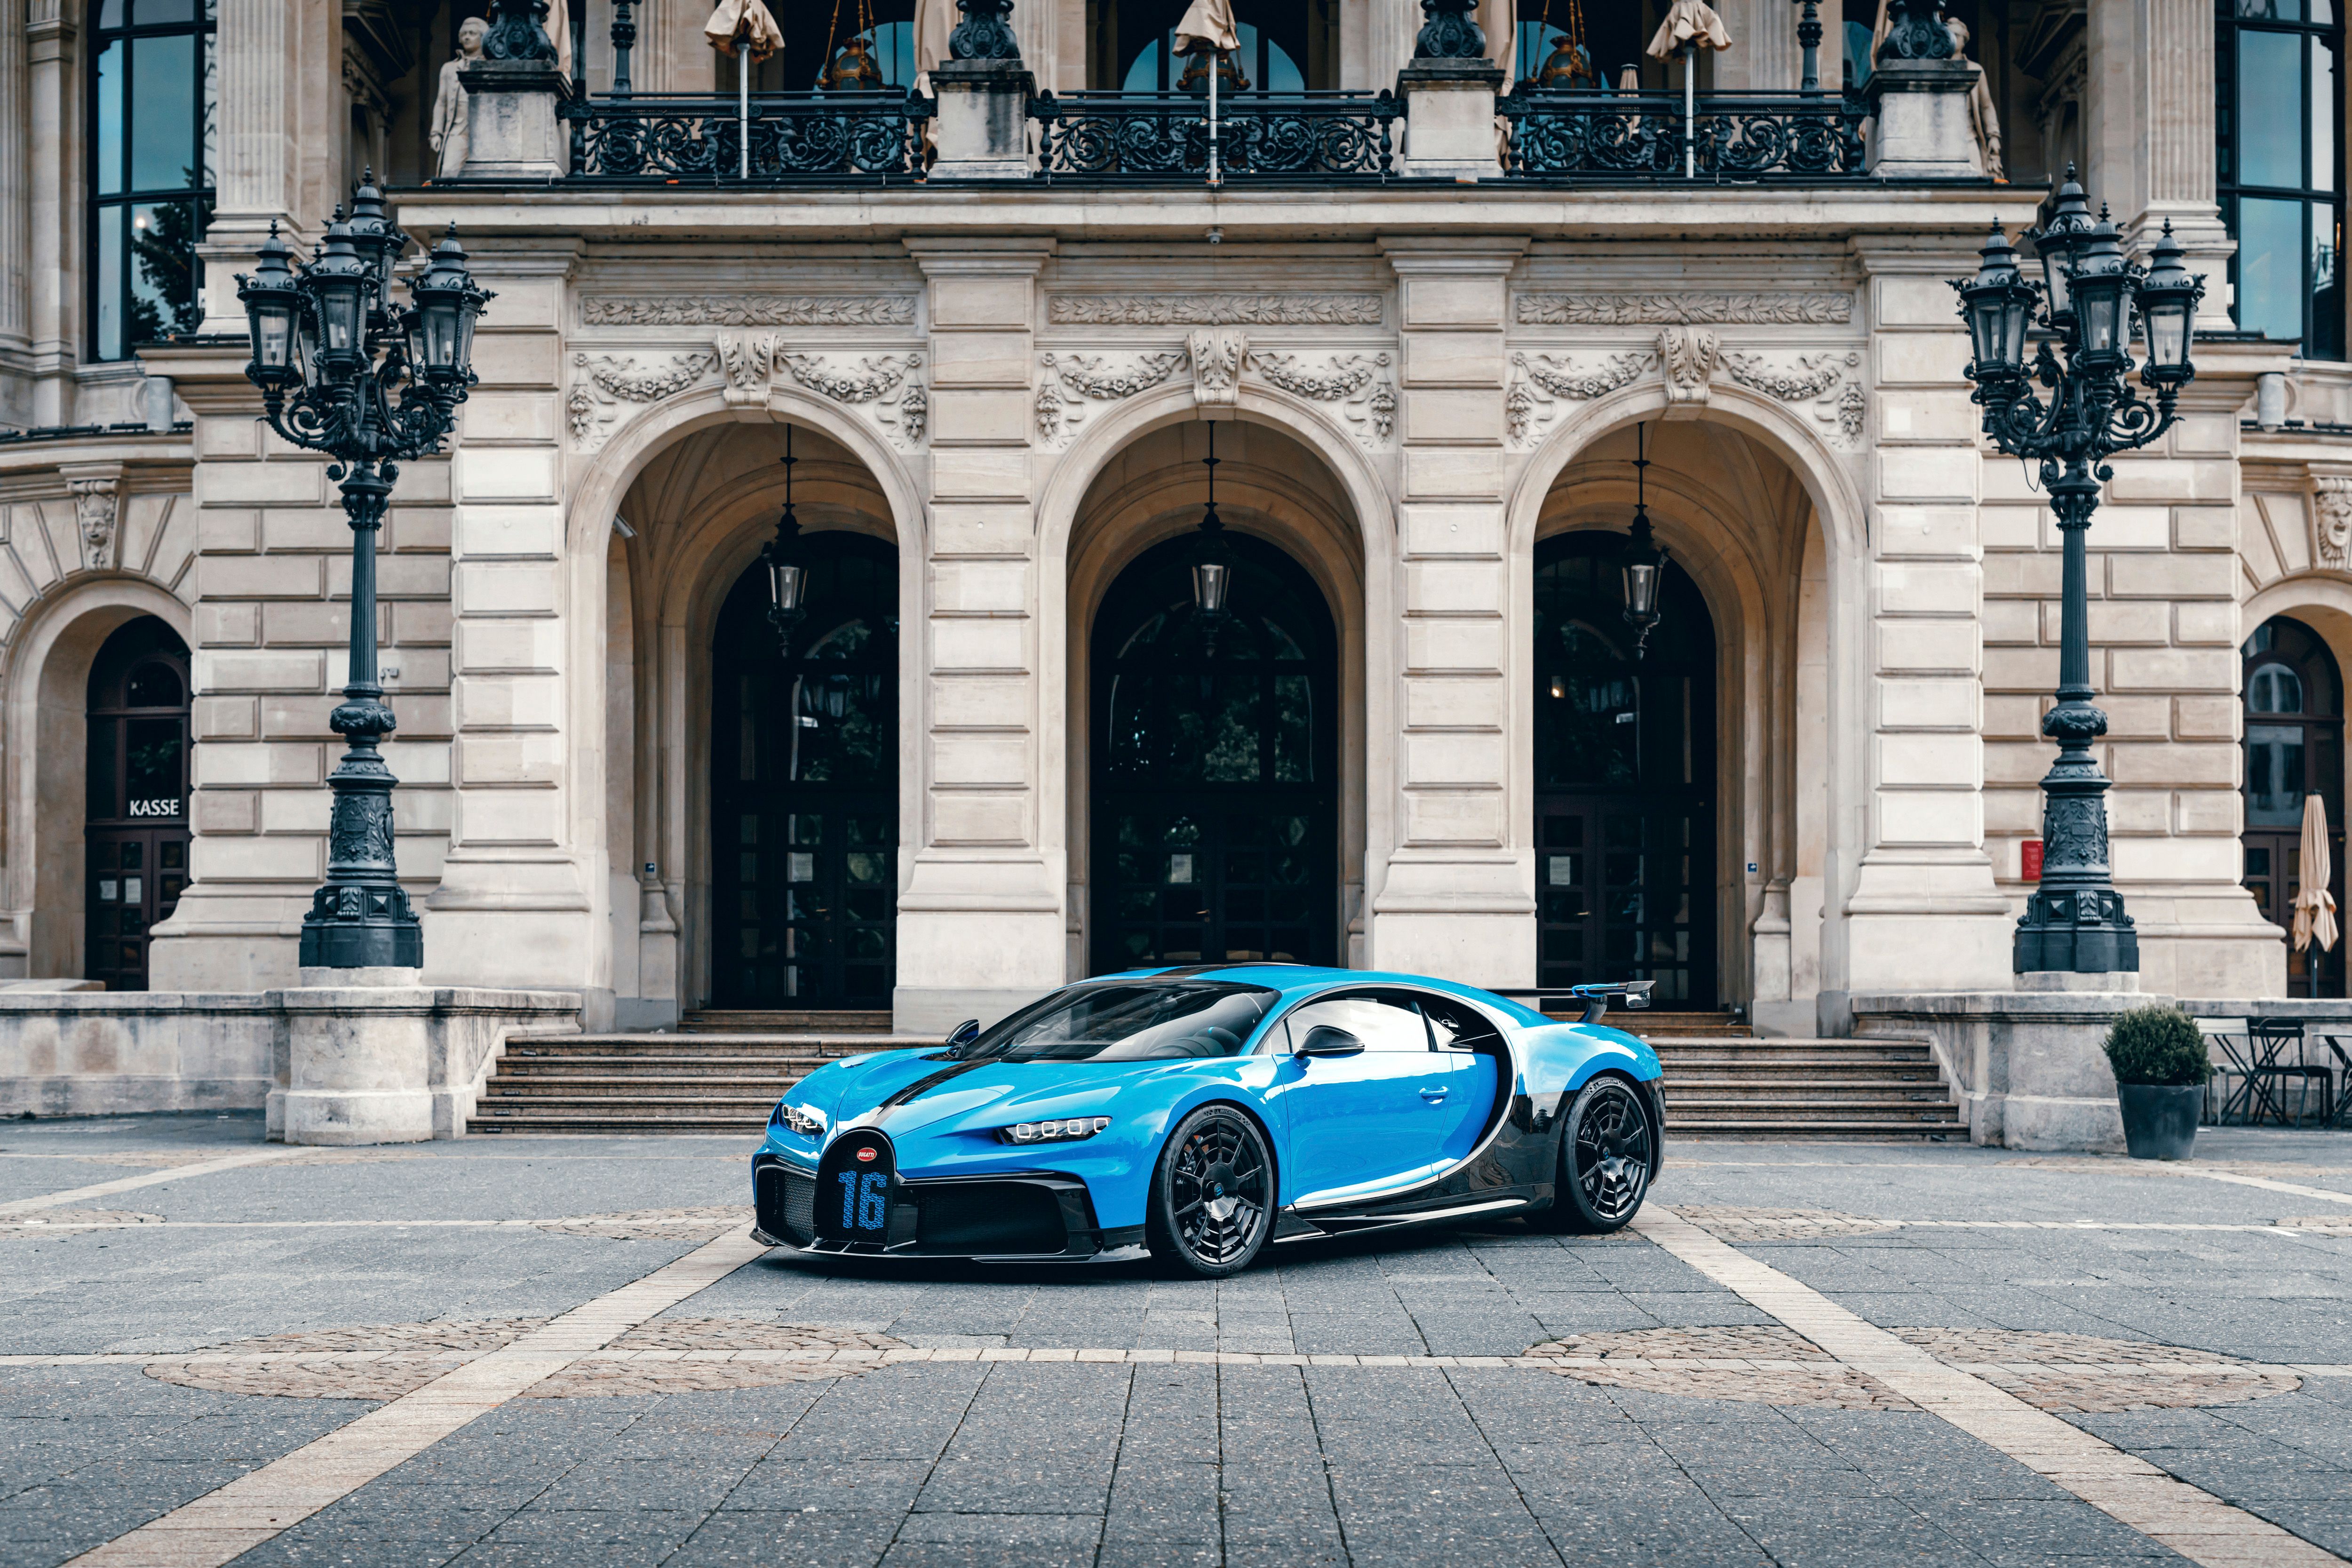 2021 The Bugatti Chiron Pur Sport Is Better On The Road Than You'd Expect